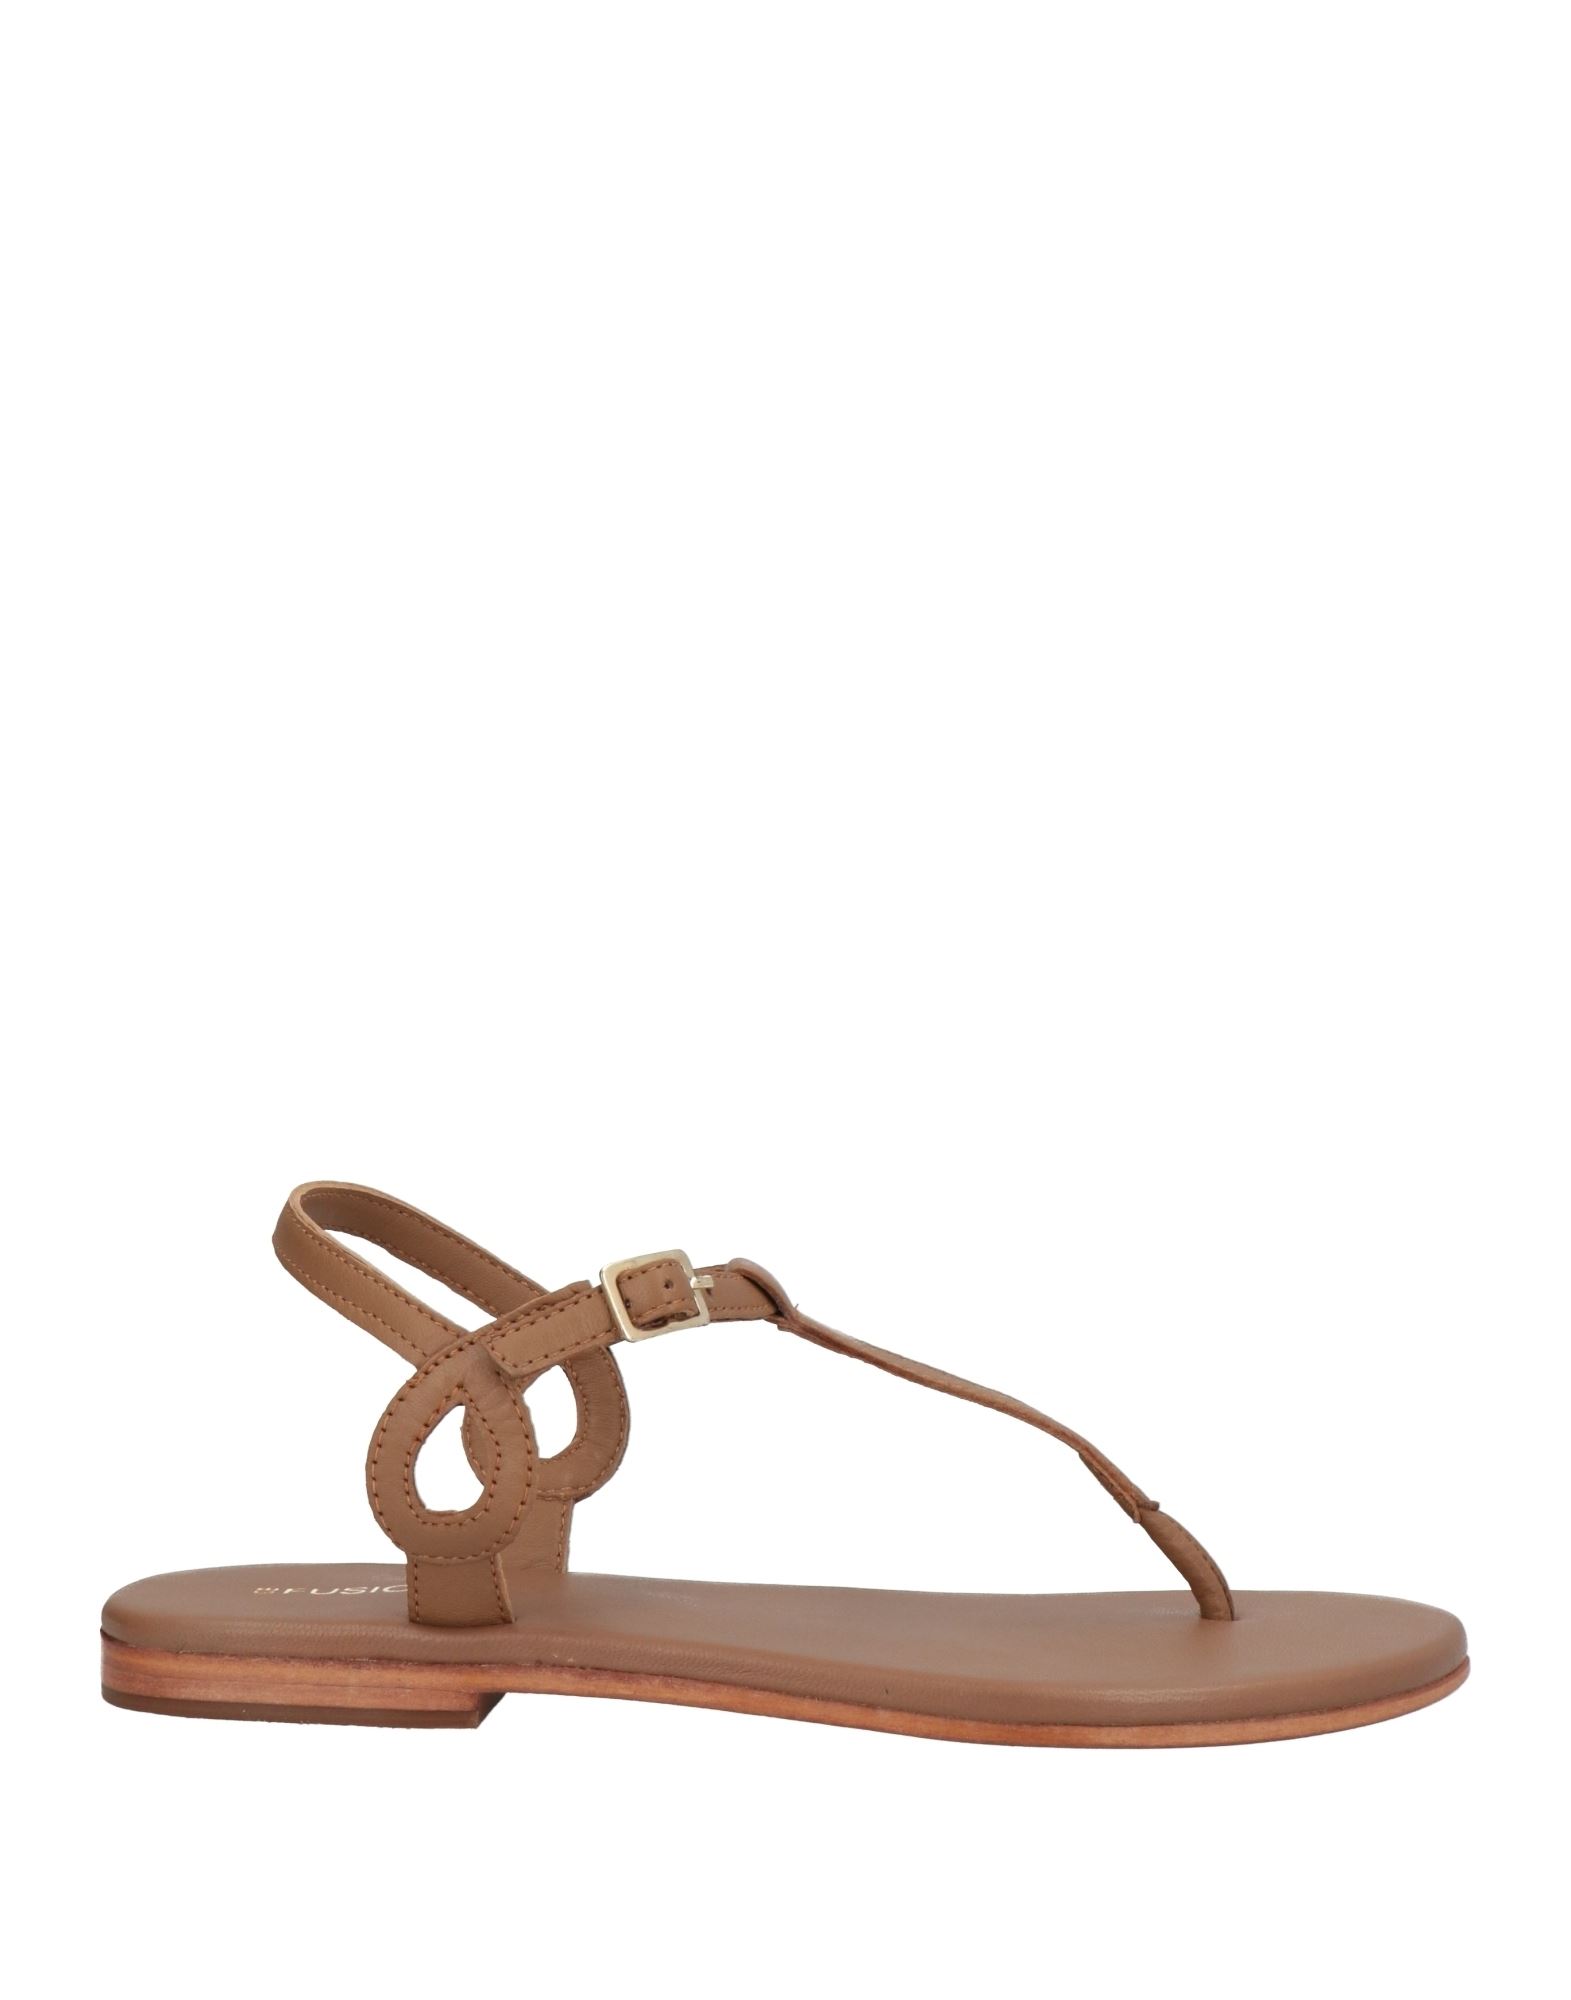 CB FUSION CB FUSION WOMAN THONG SANDAL LIGHT BROWN SIZE 8 SOFT LEATHER